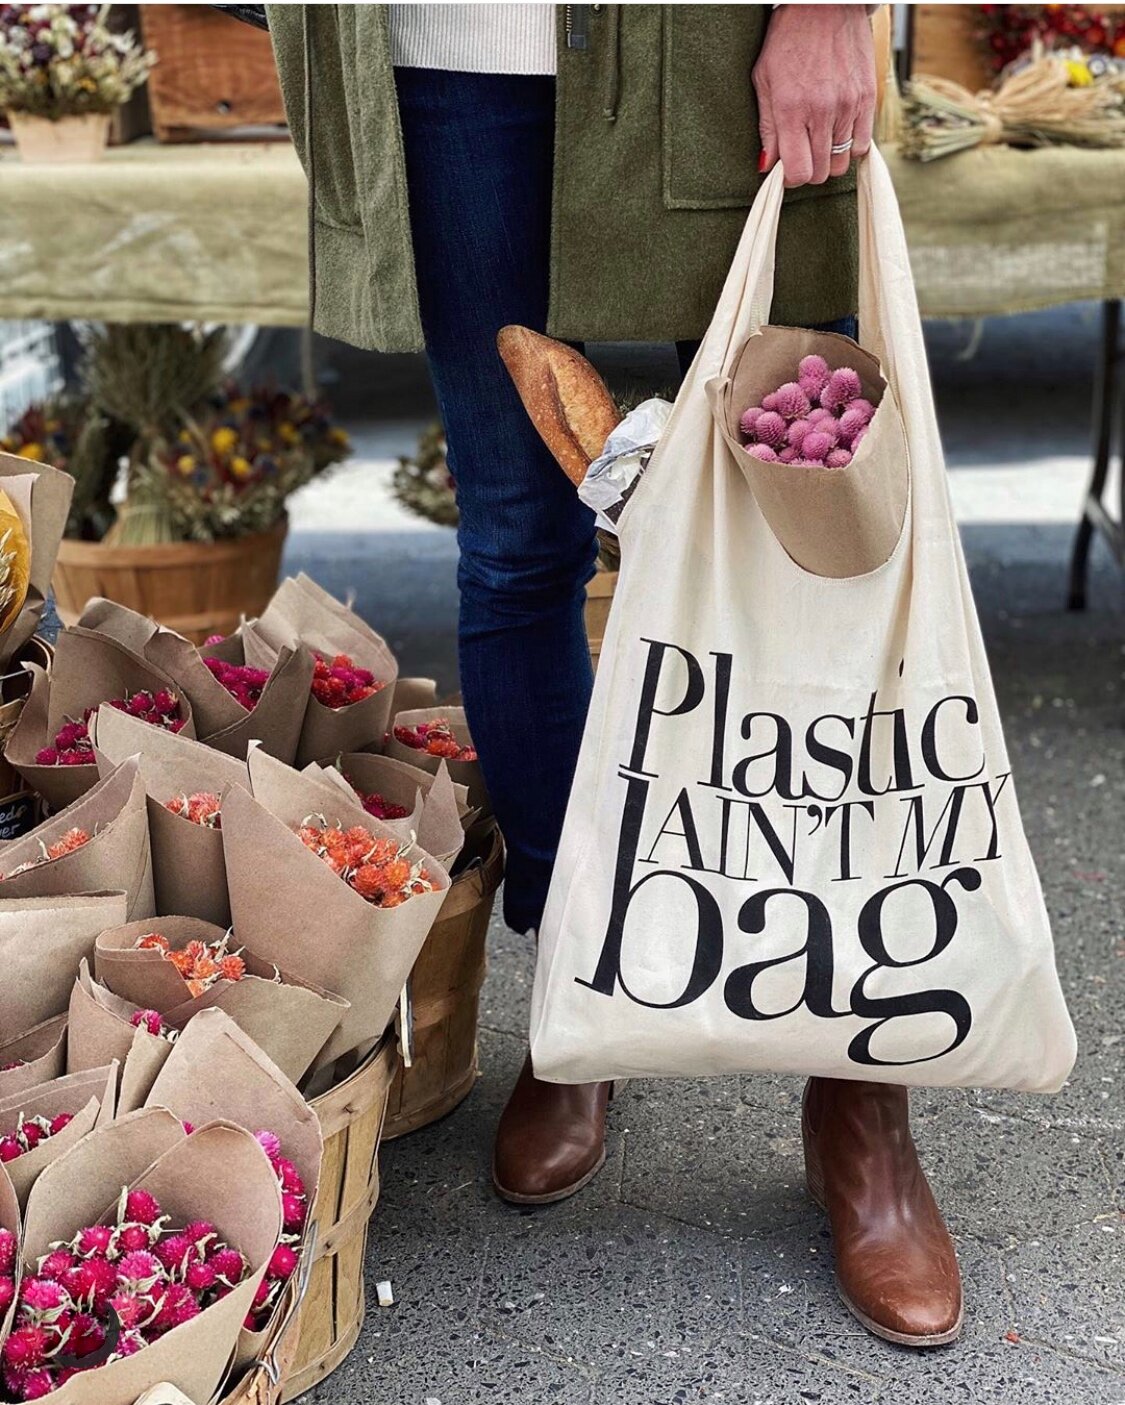 5 Biodegradable Alternatives to Plastic Bags